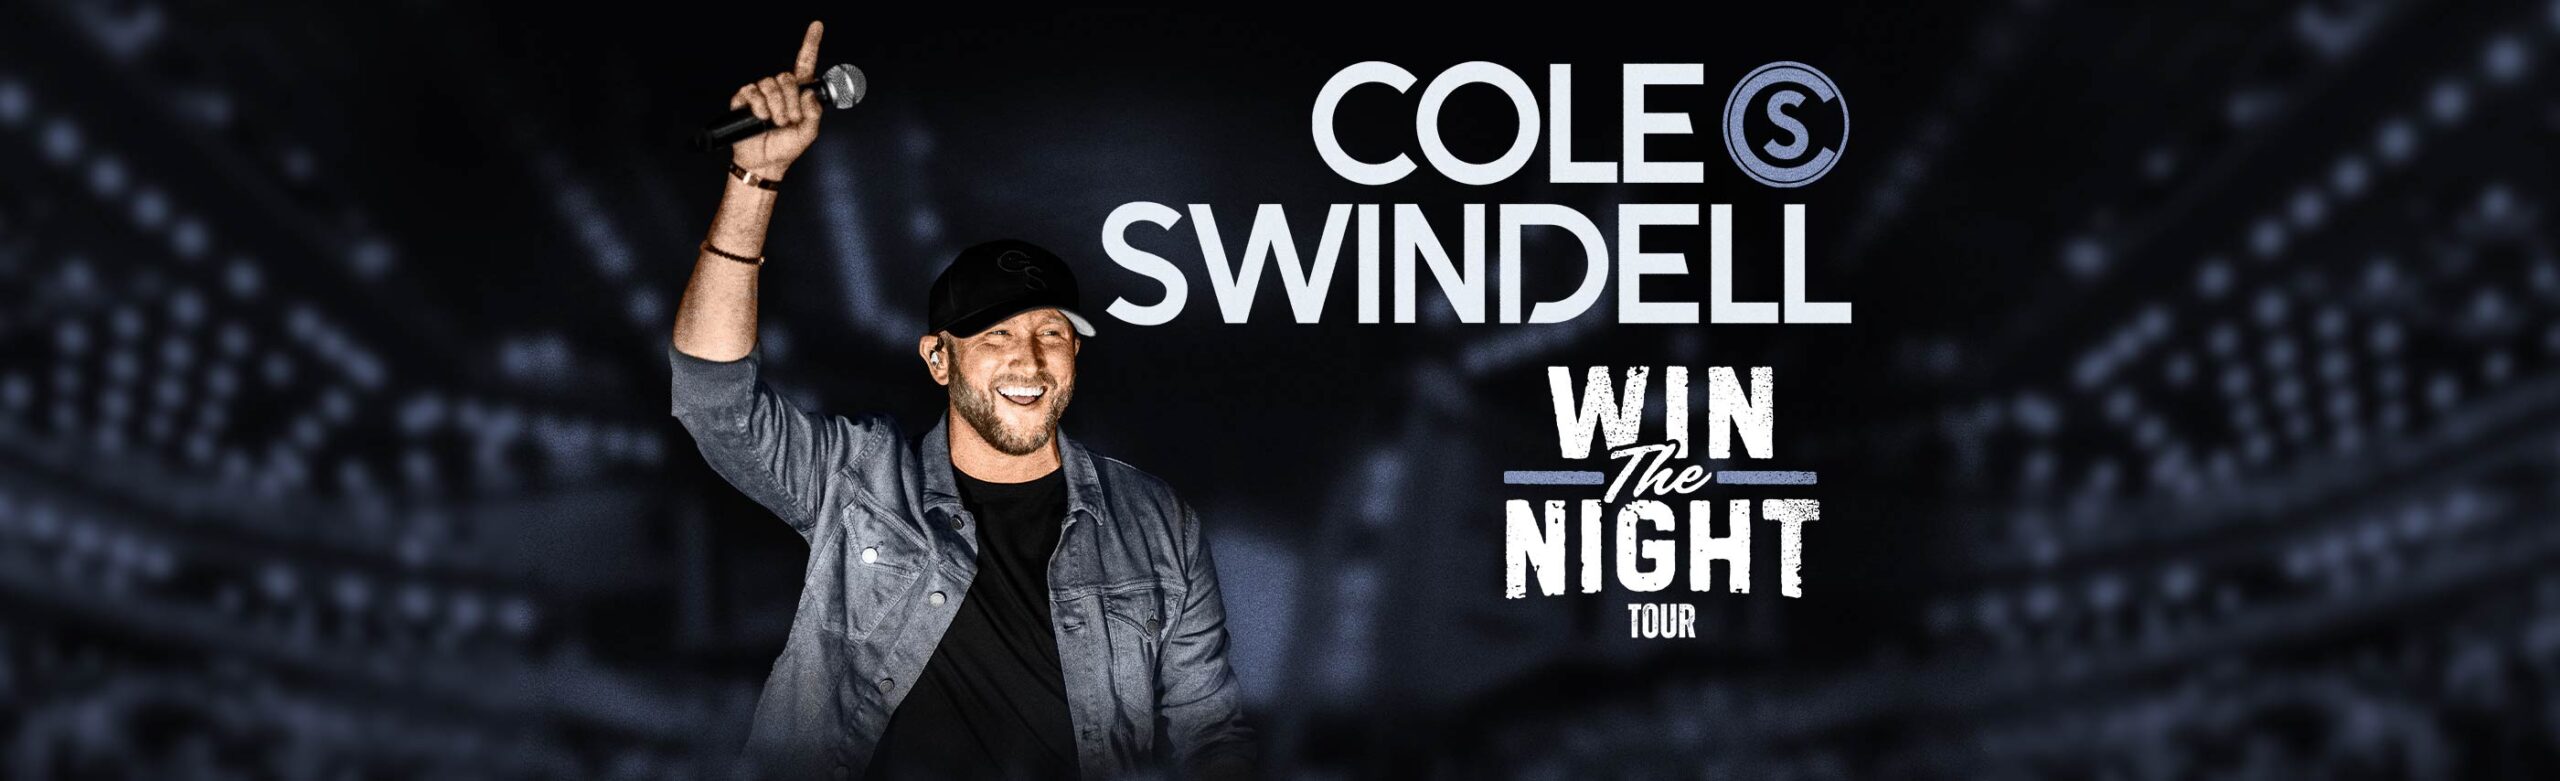 Cole Swindell Announces Concert at KettleHouse Amphitheater with Dylan Scott and Restless Road Image